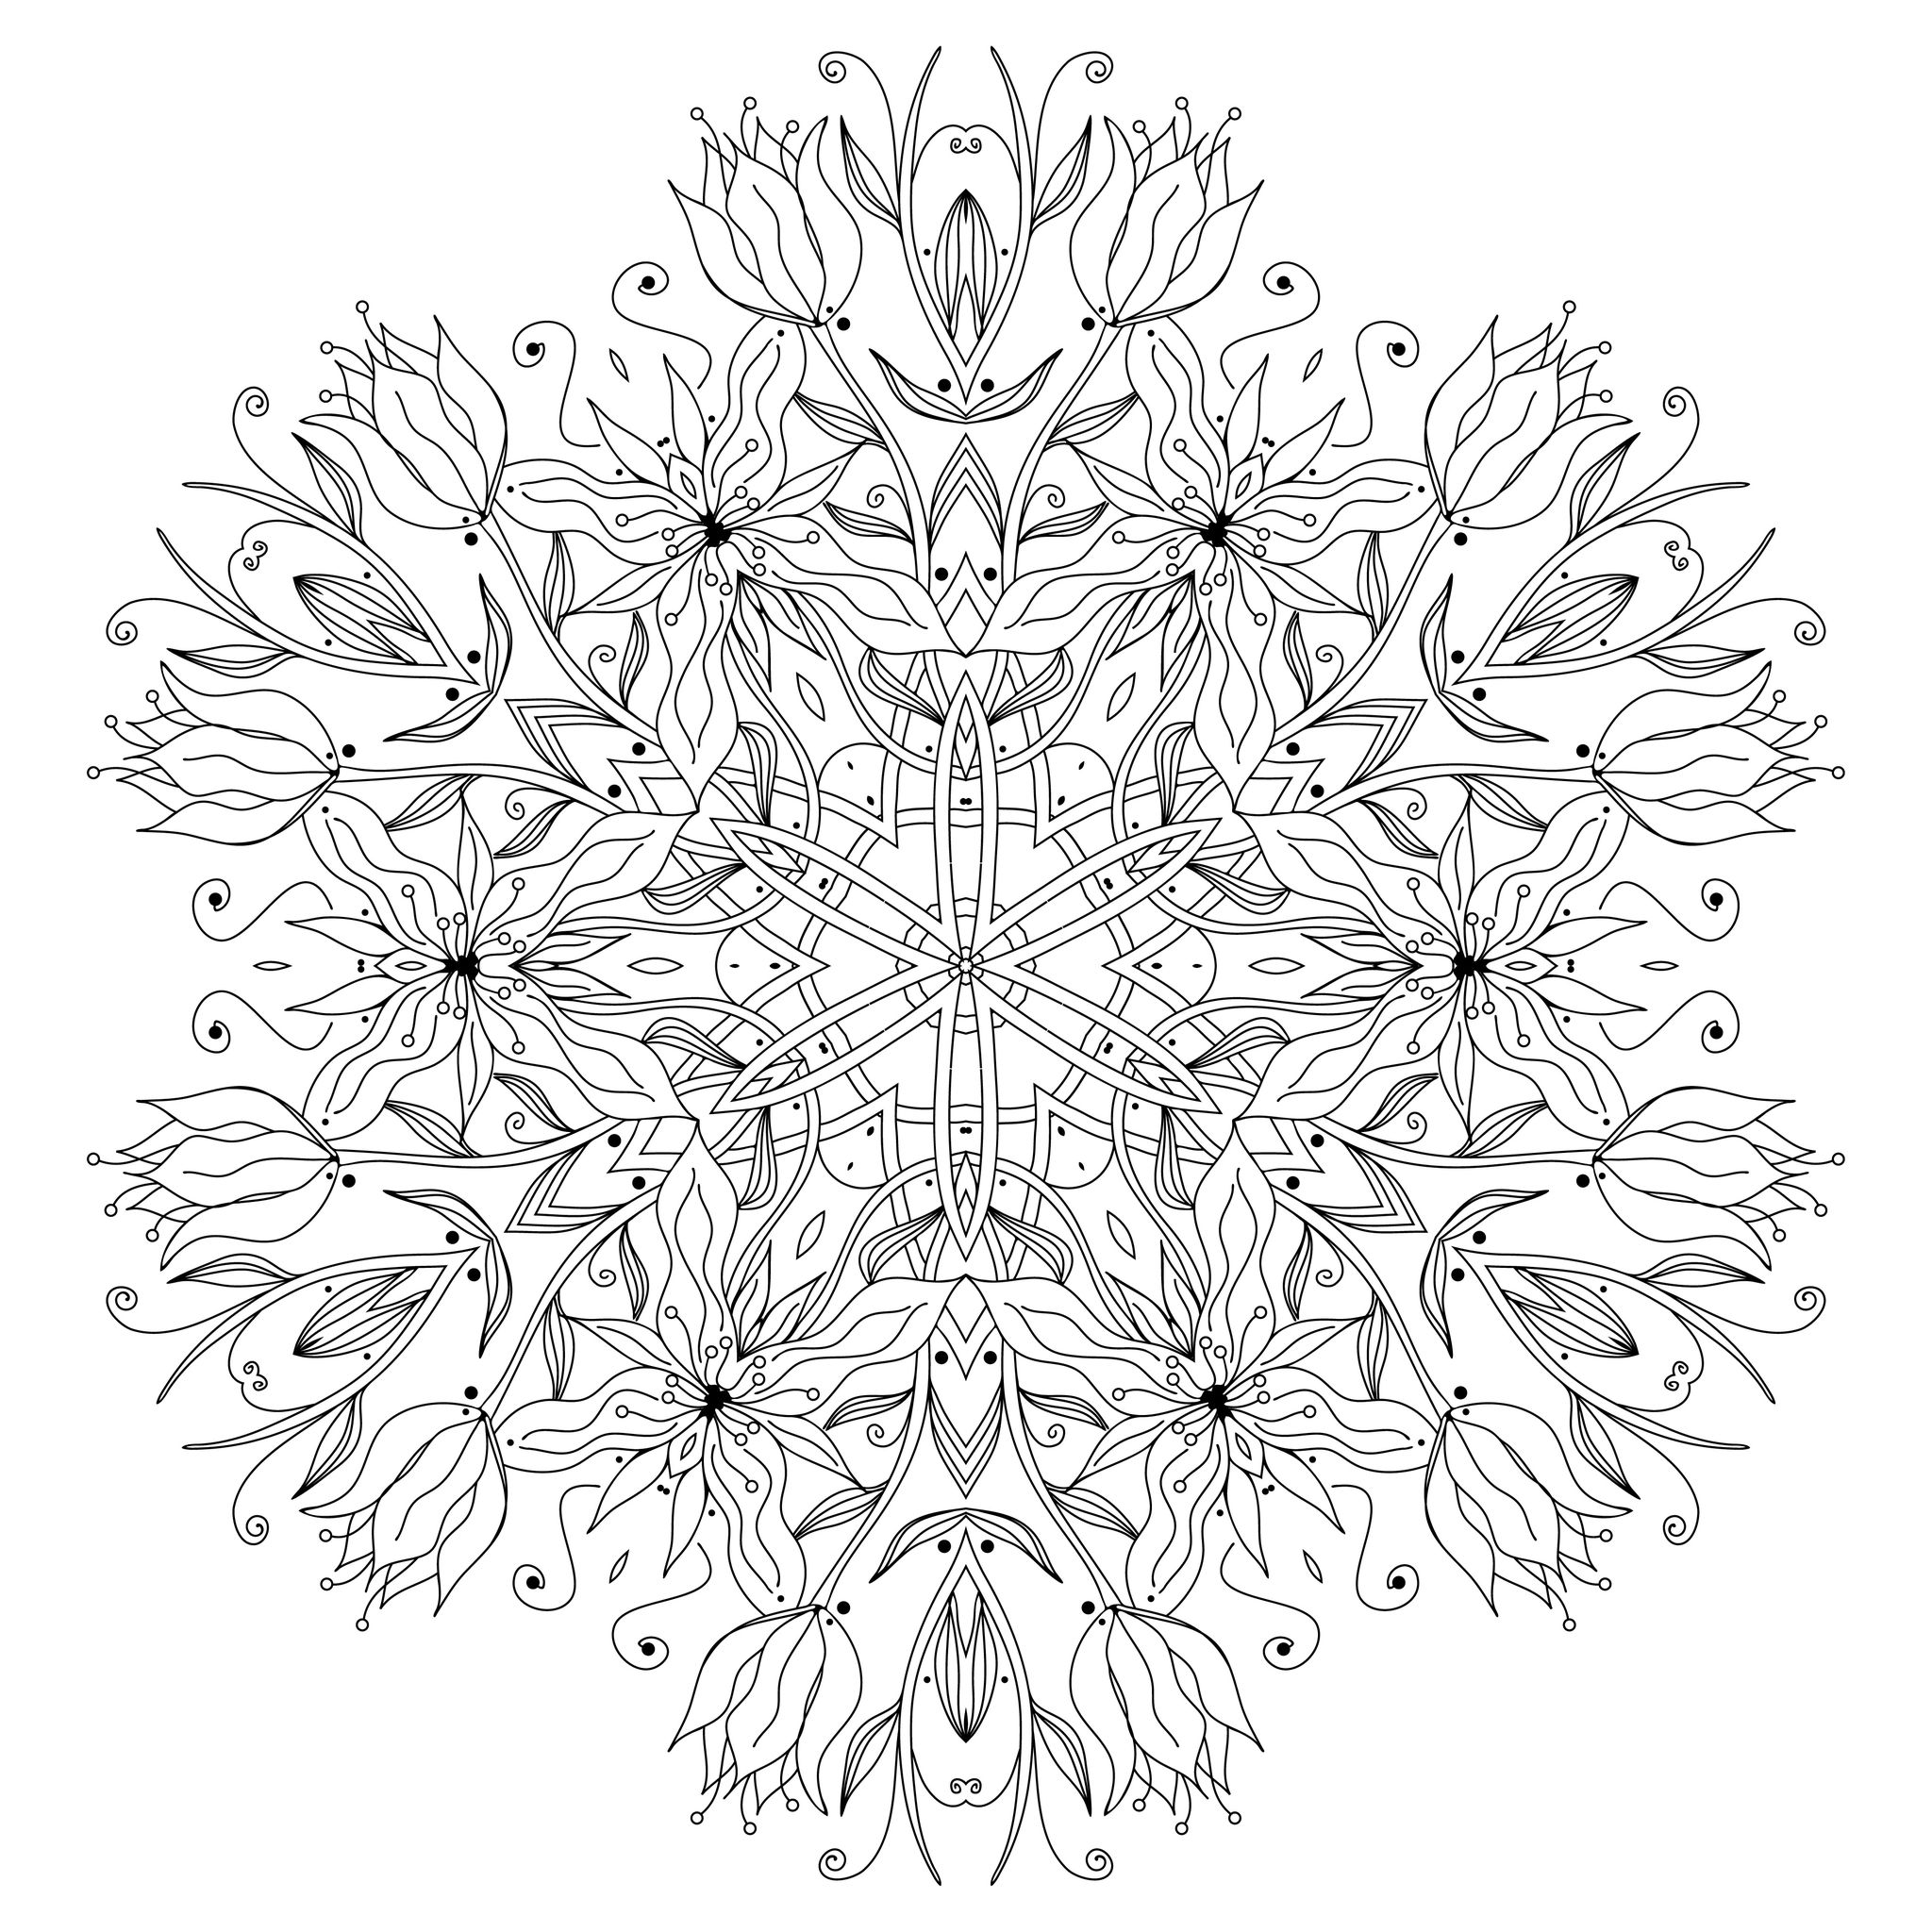 Coloring for adults is about taking some time during your day to slow down and decompress : Prepare your pens and pencils to color this incredible and elegant Mandala coloring page, special for lovers of Flowers !